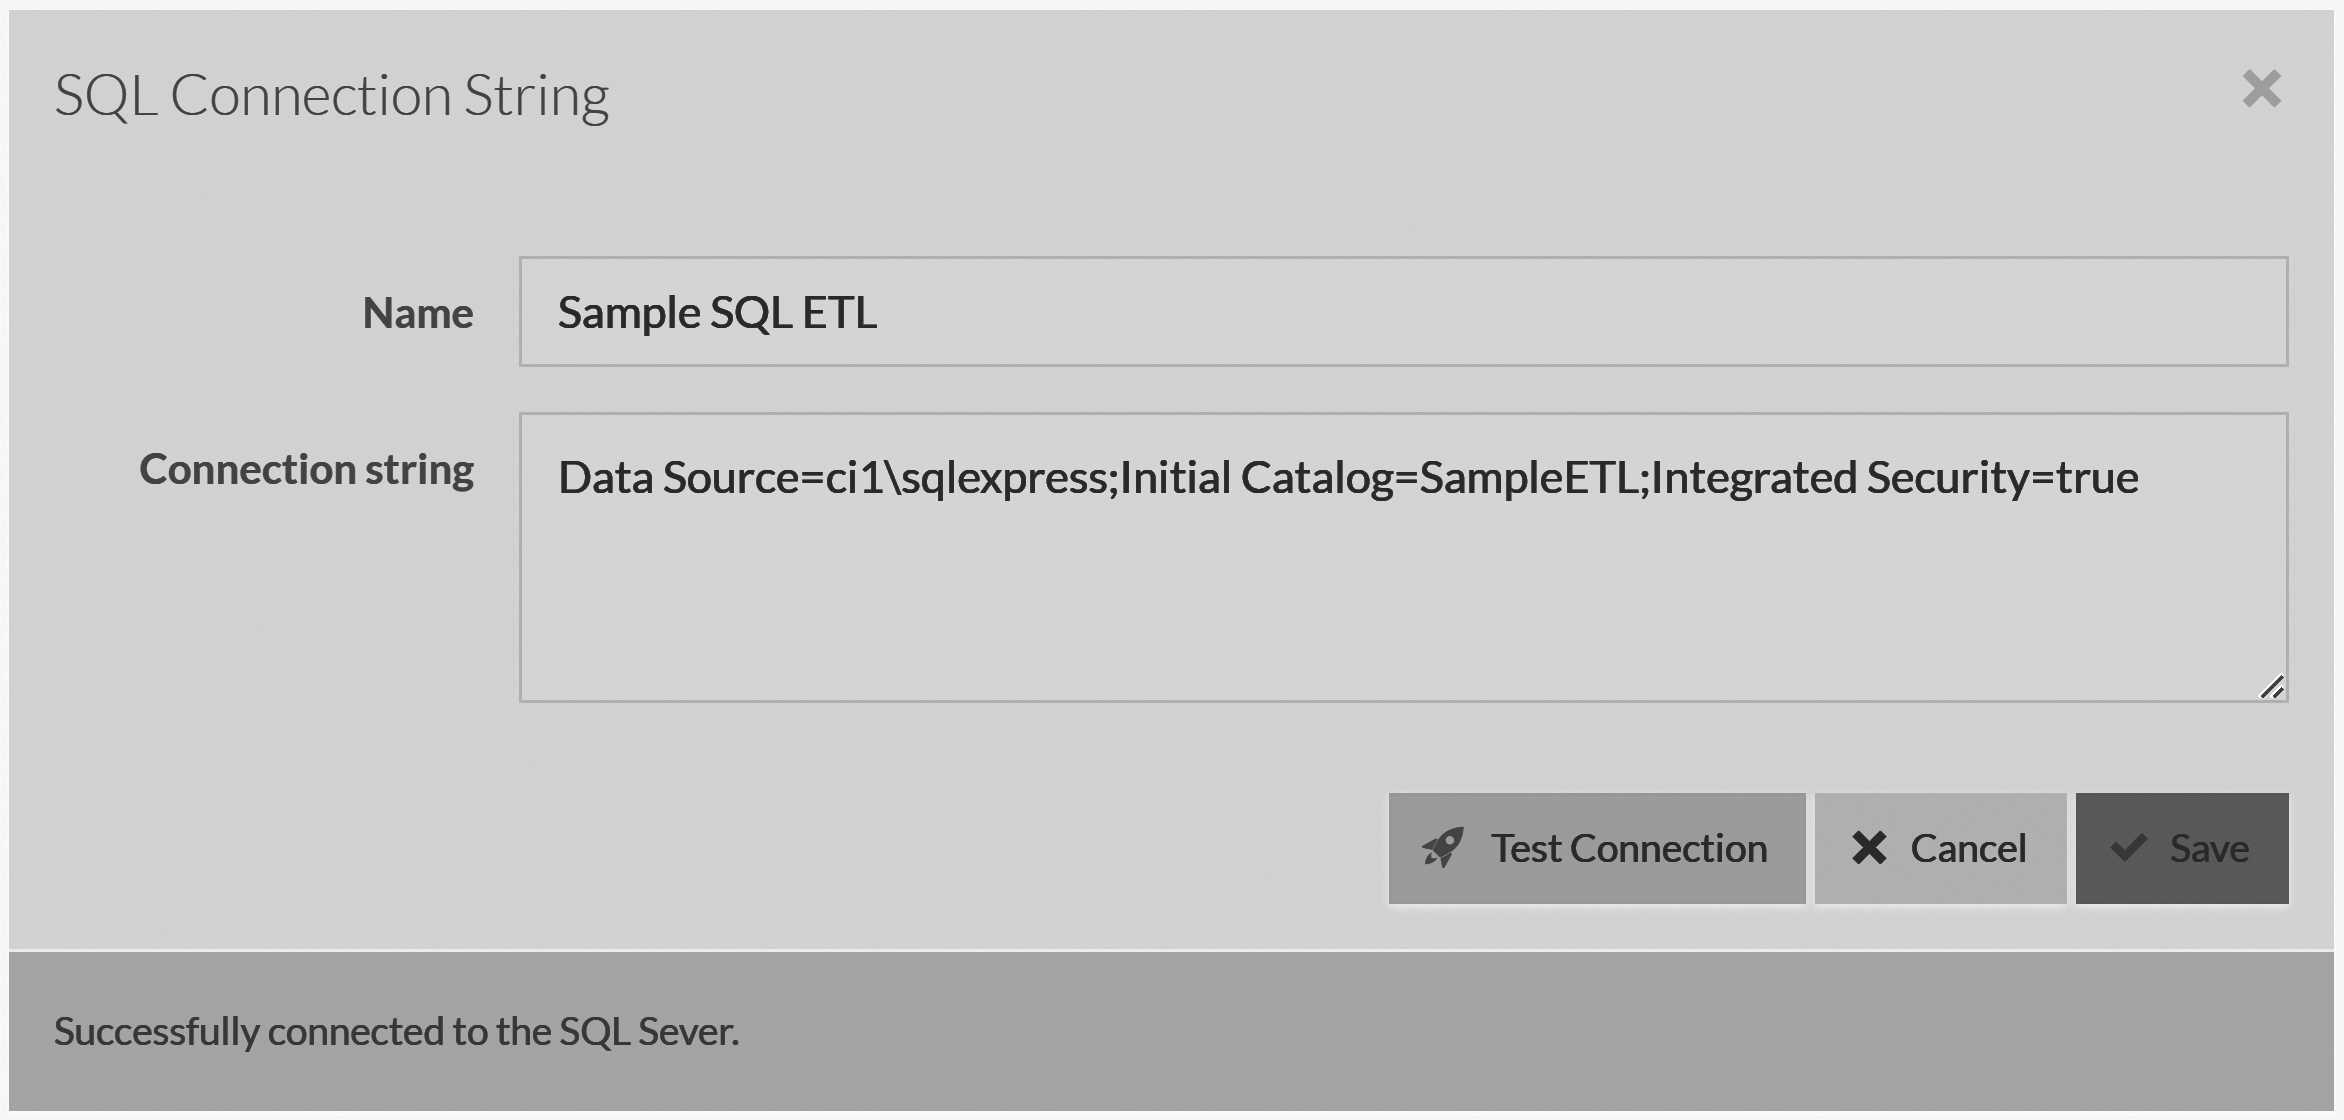 Creating a new SQL connection string